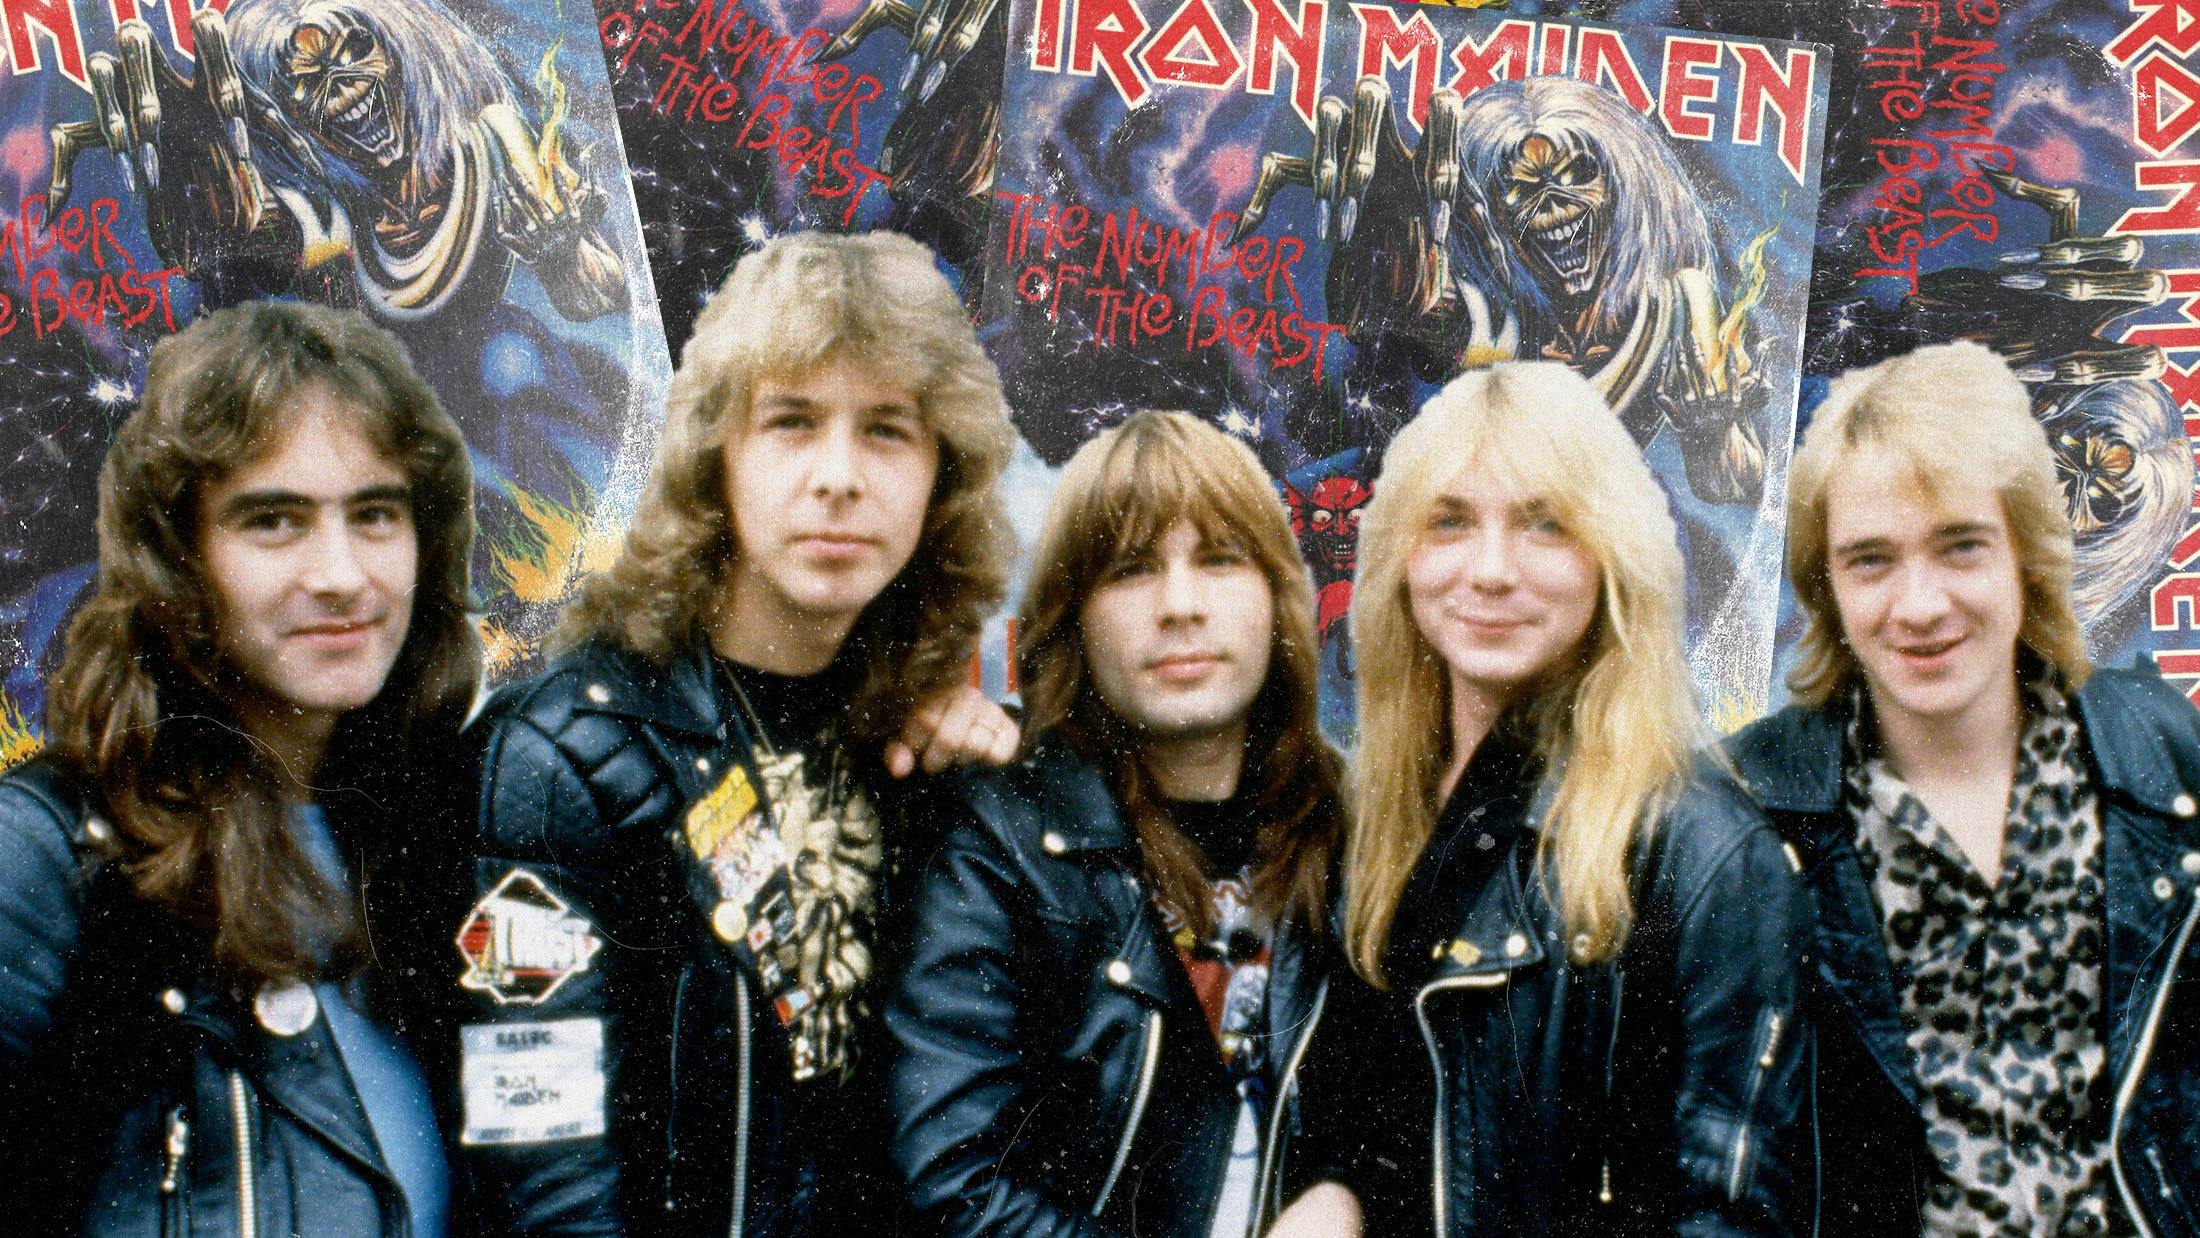 How Number Of The Beast set Iron Maiden on the road to heavy metal glory